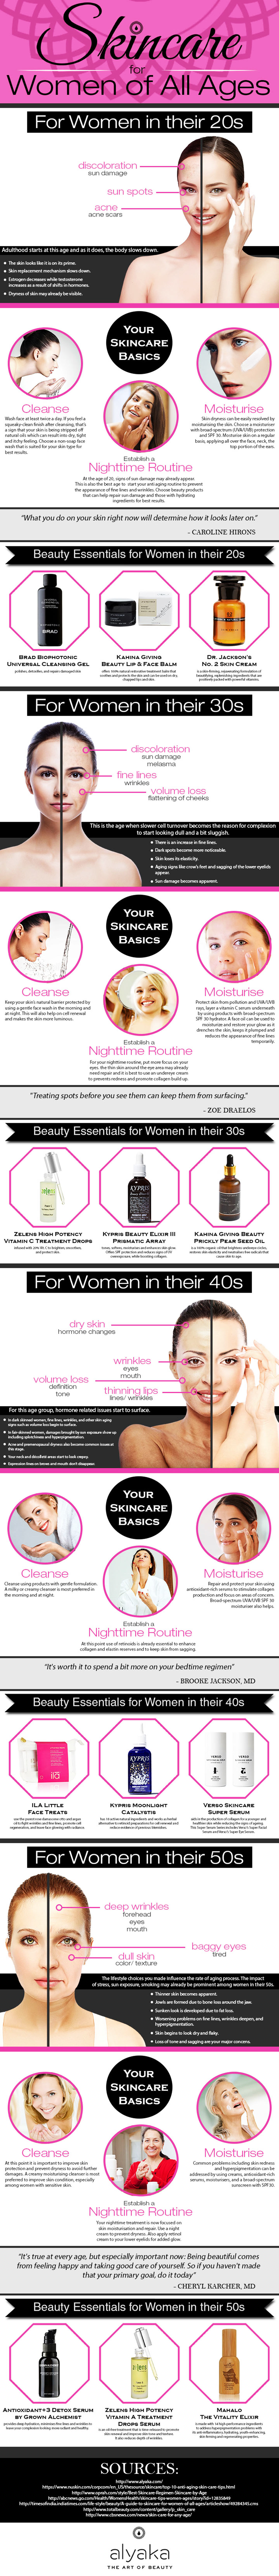 Skincare for Women of All Ages - Beauty Infographic